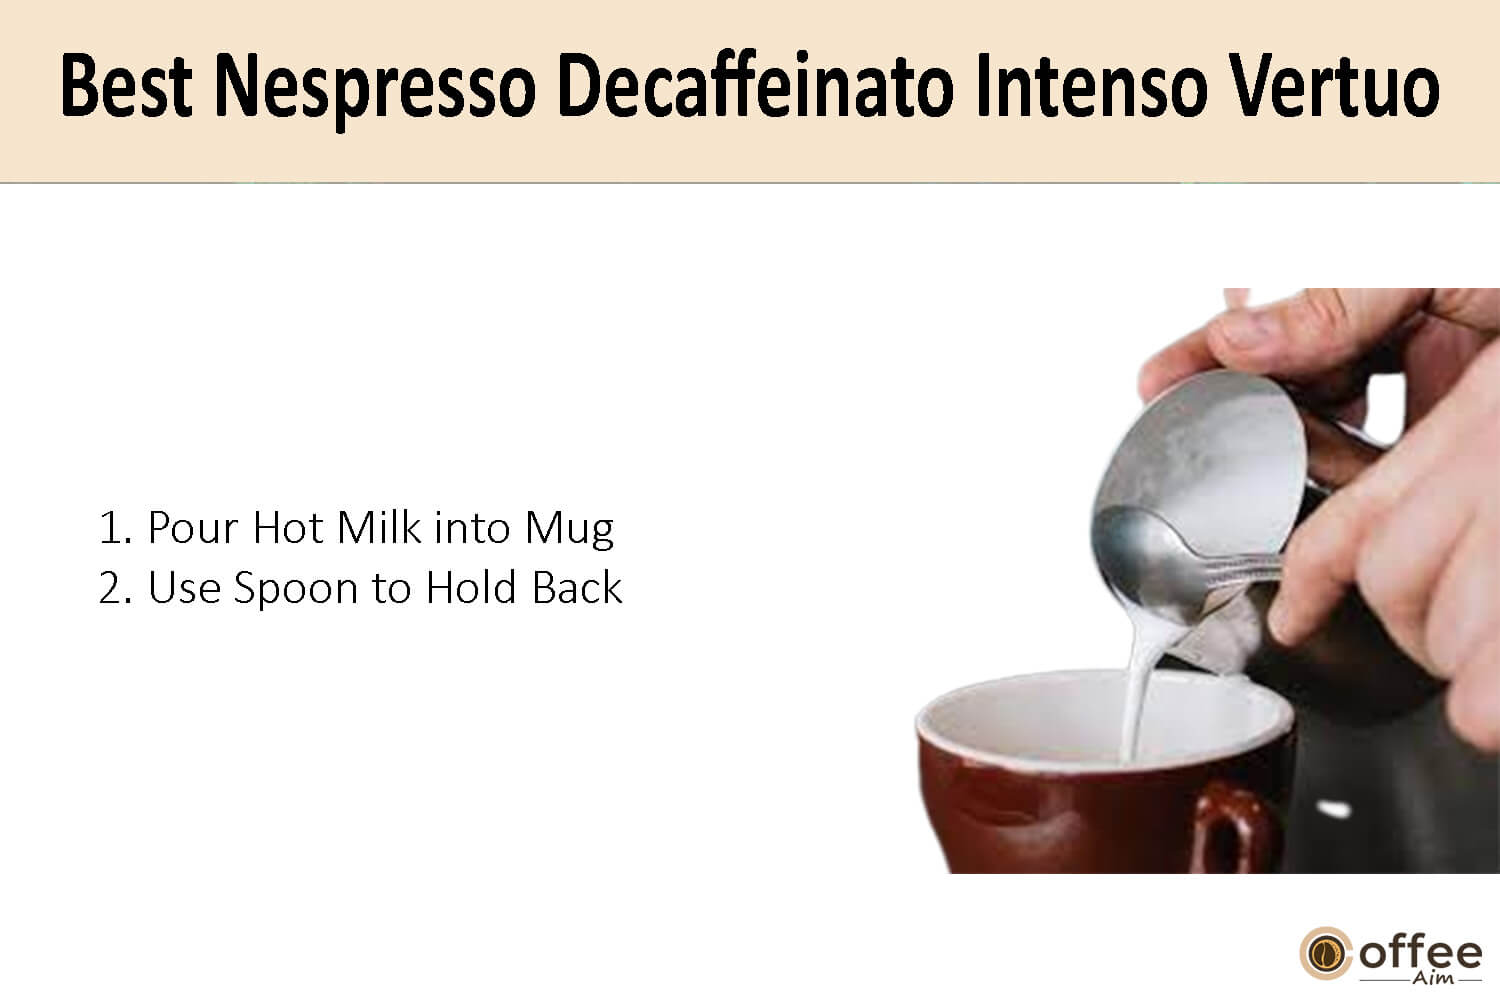 In this image, I clarify the preparation instructions for crafting the finest Altissio Decaffeinato Nespresso Vertuo coffee pod.